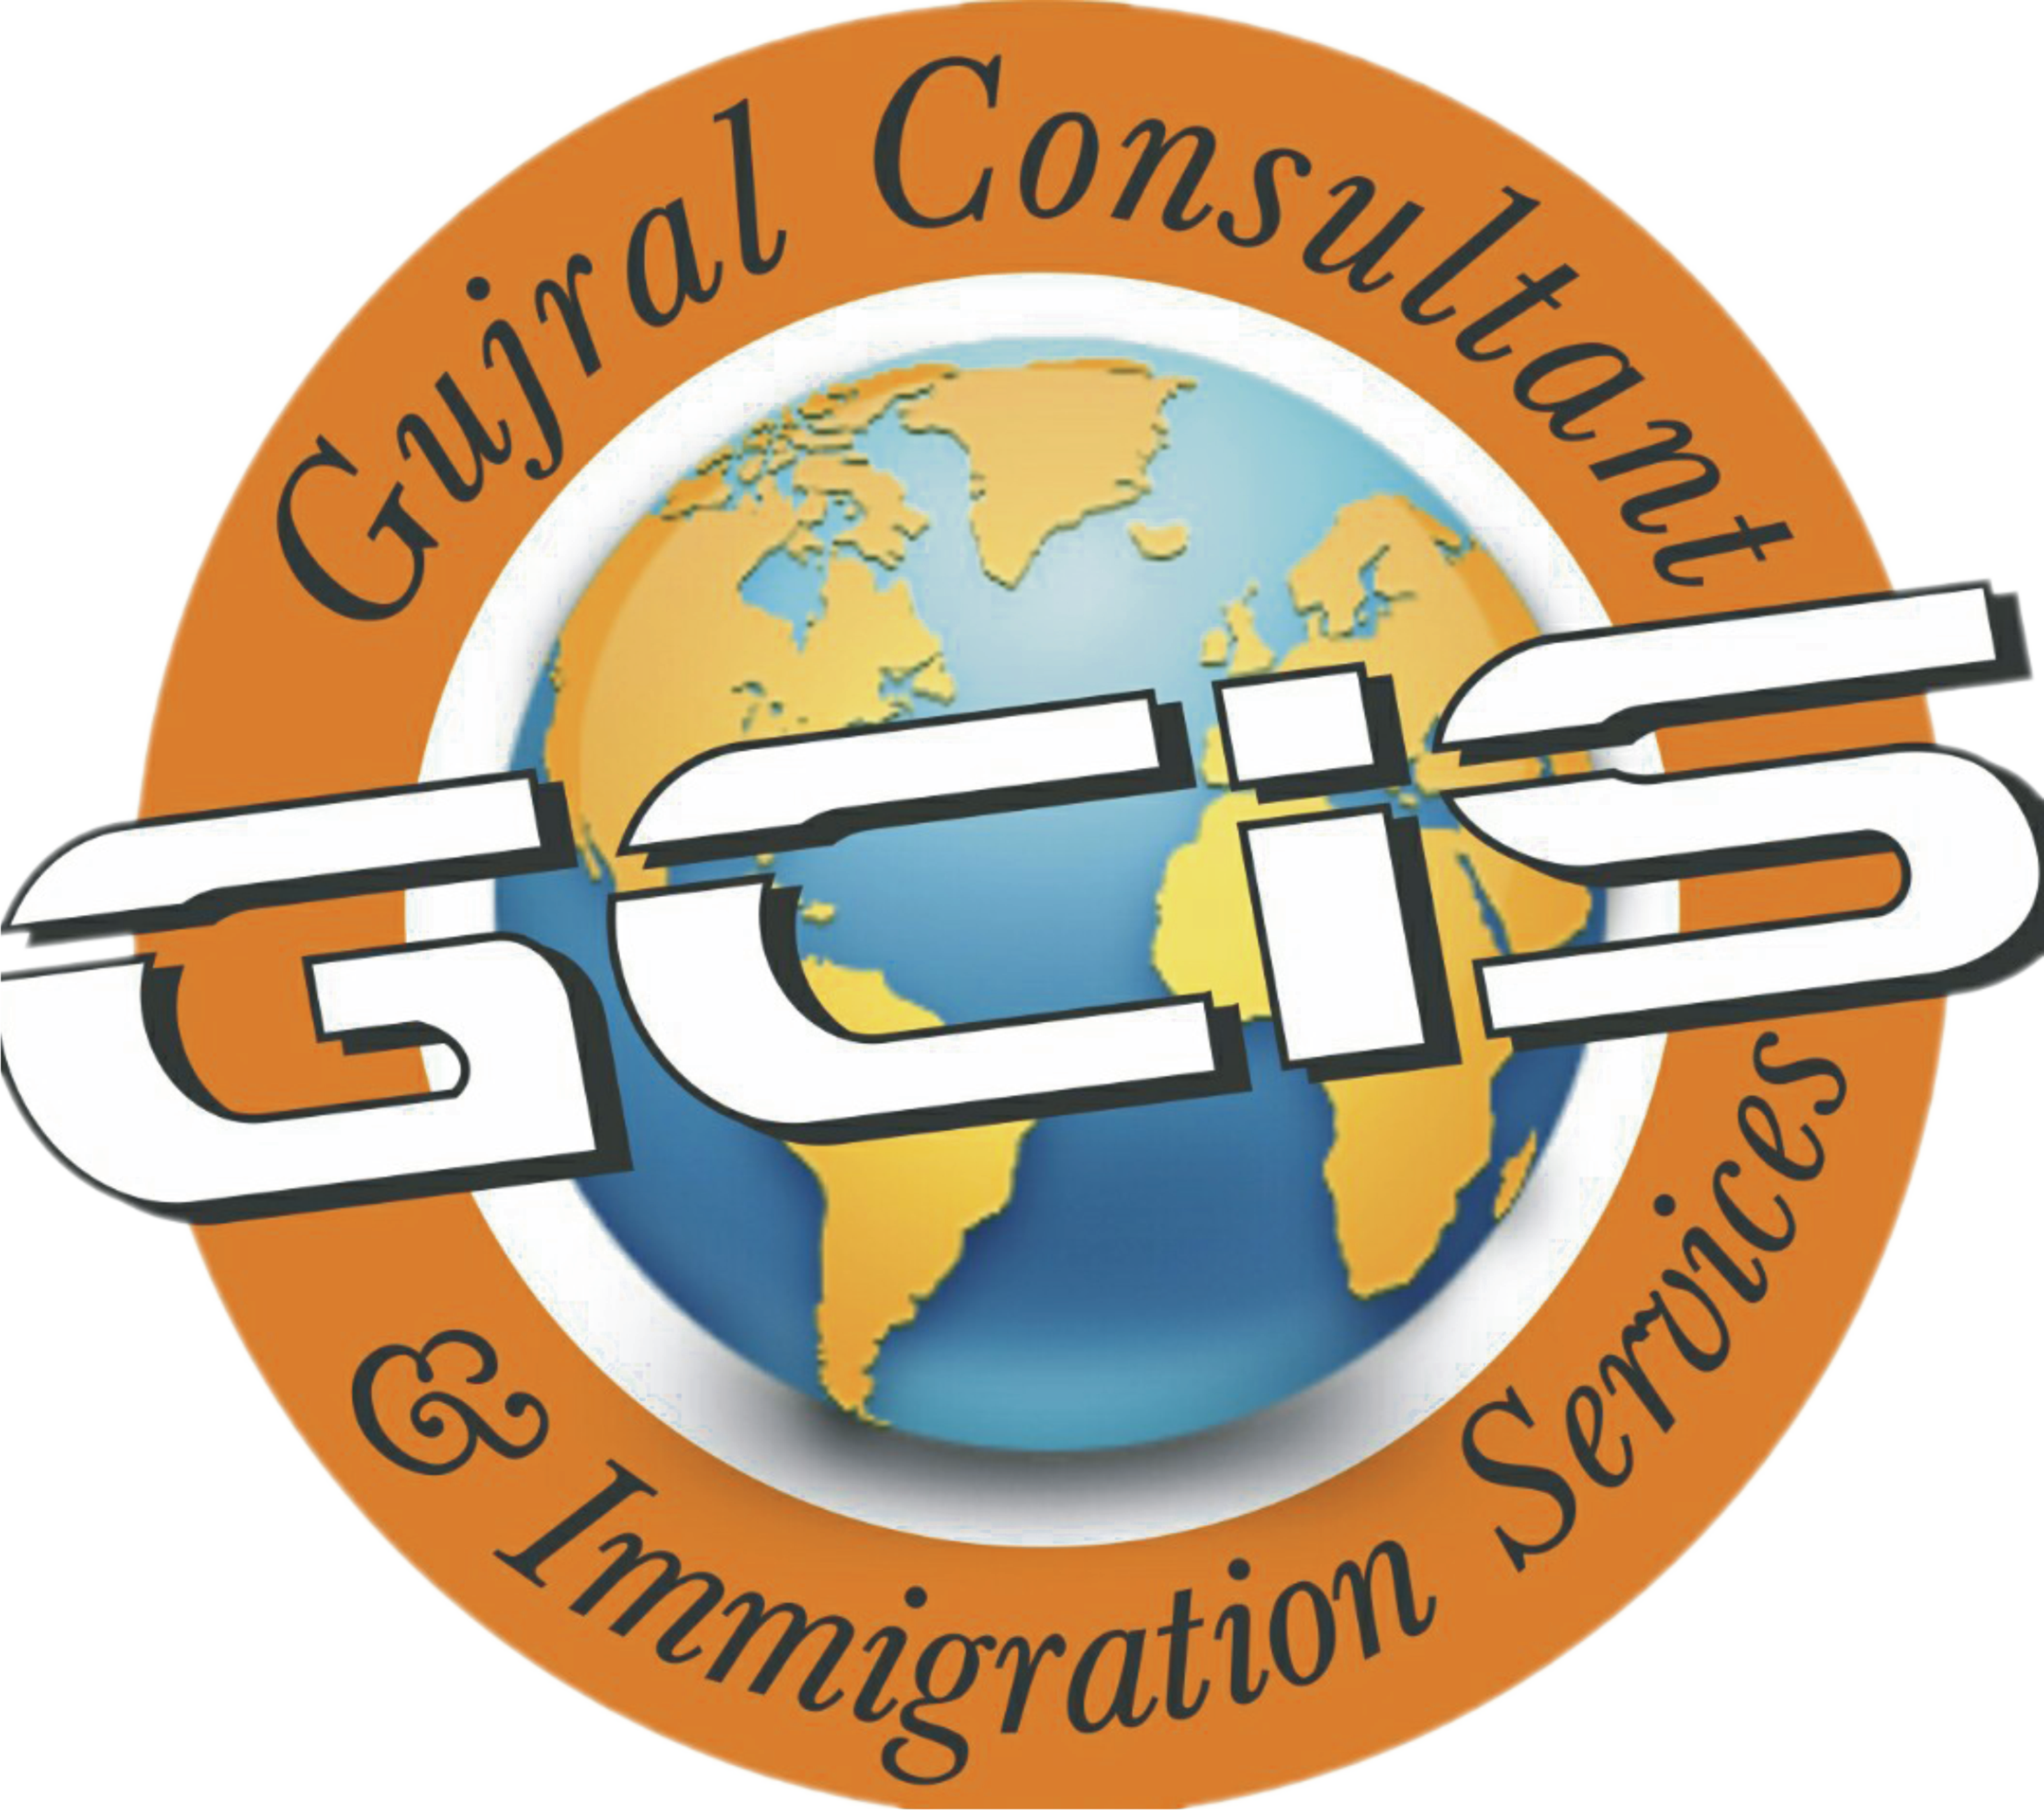 Gujral Consultant & Immigration Services|Architect|Professional Services